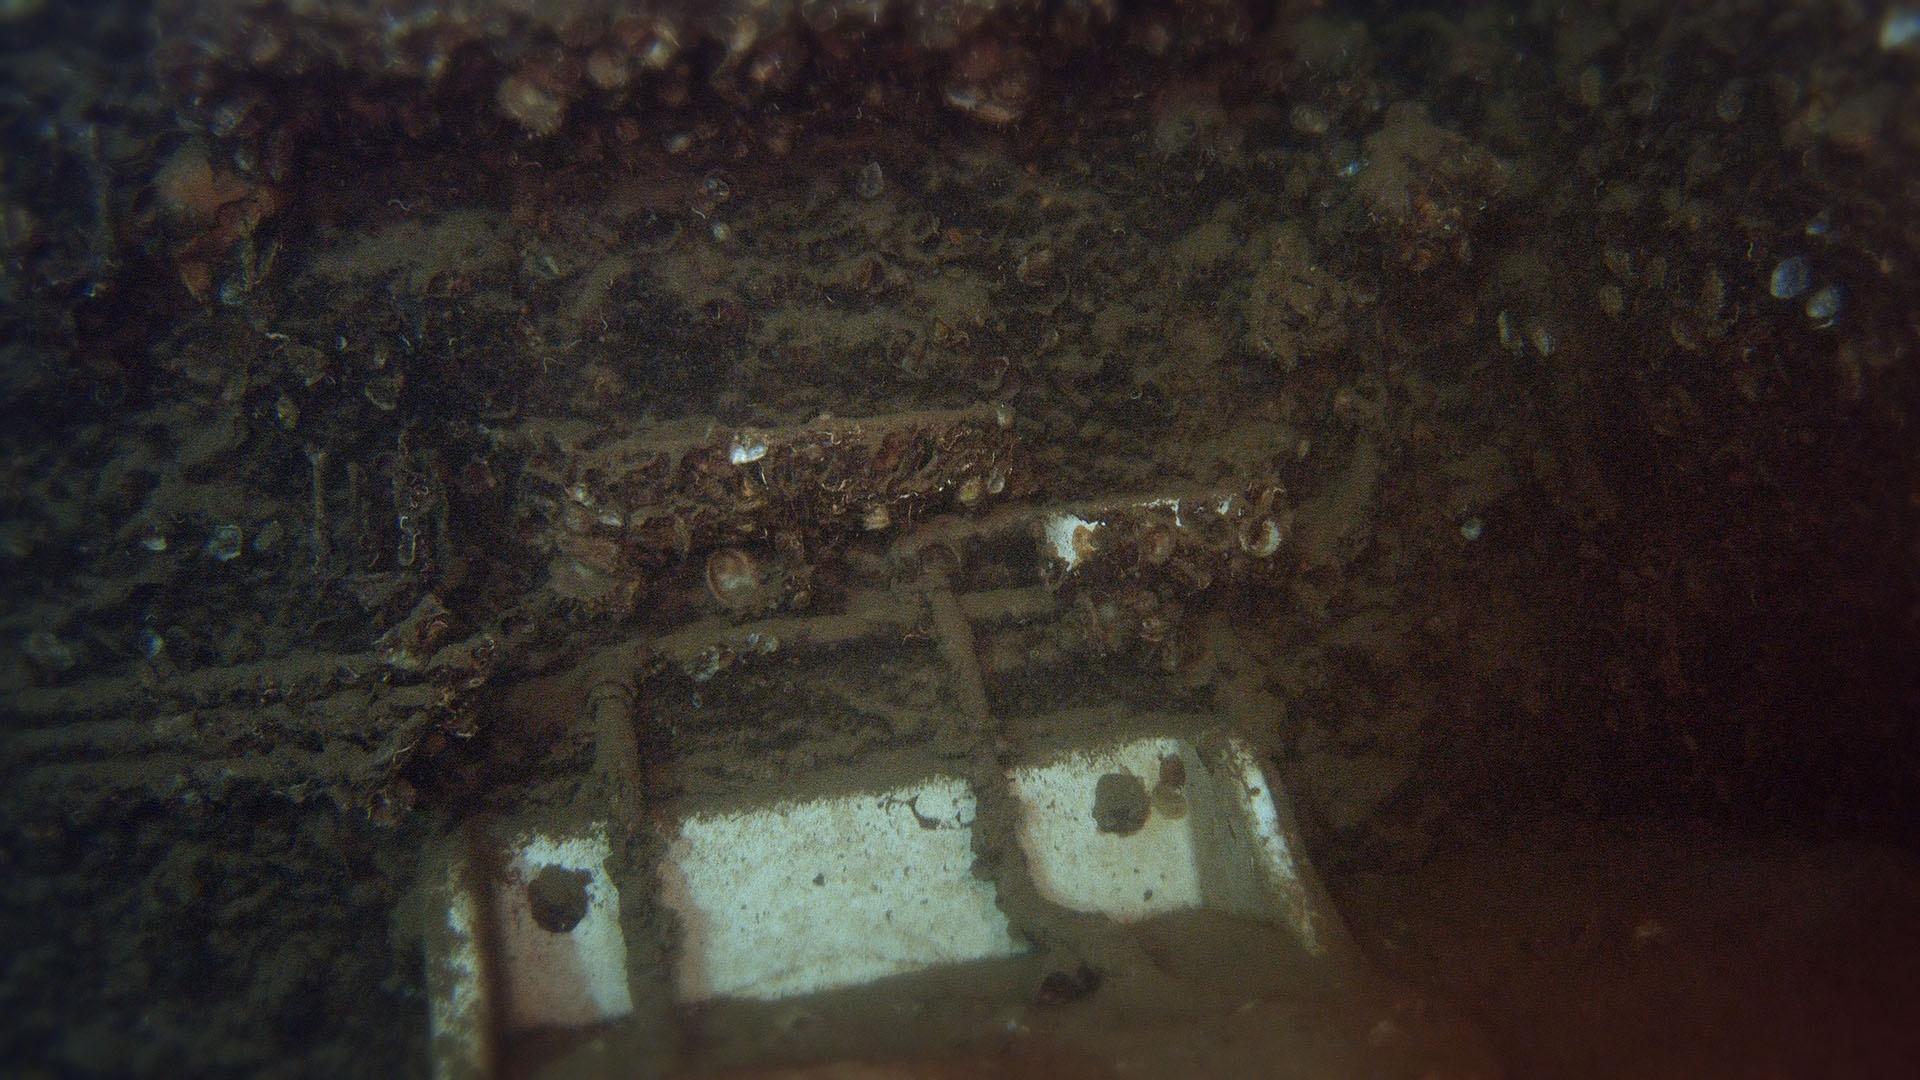 A sink within the USS Arizona; porcelain does not collect marine growth.